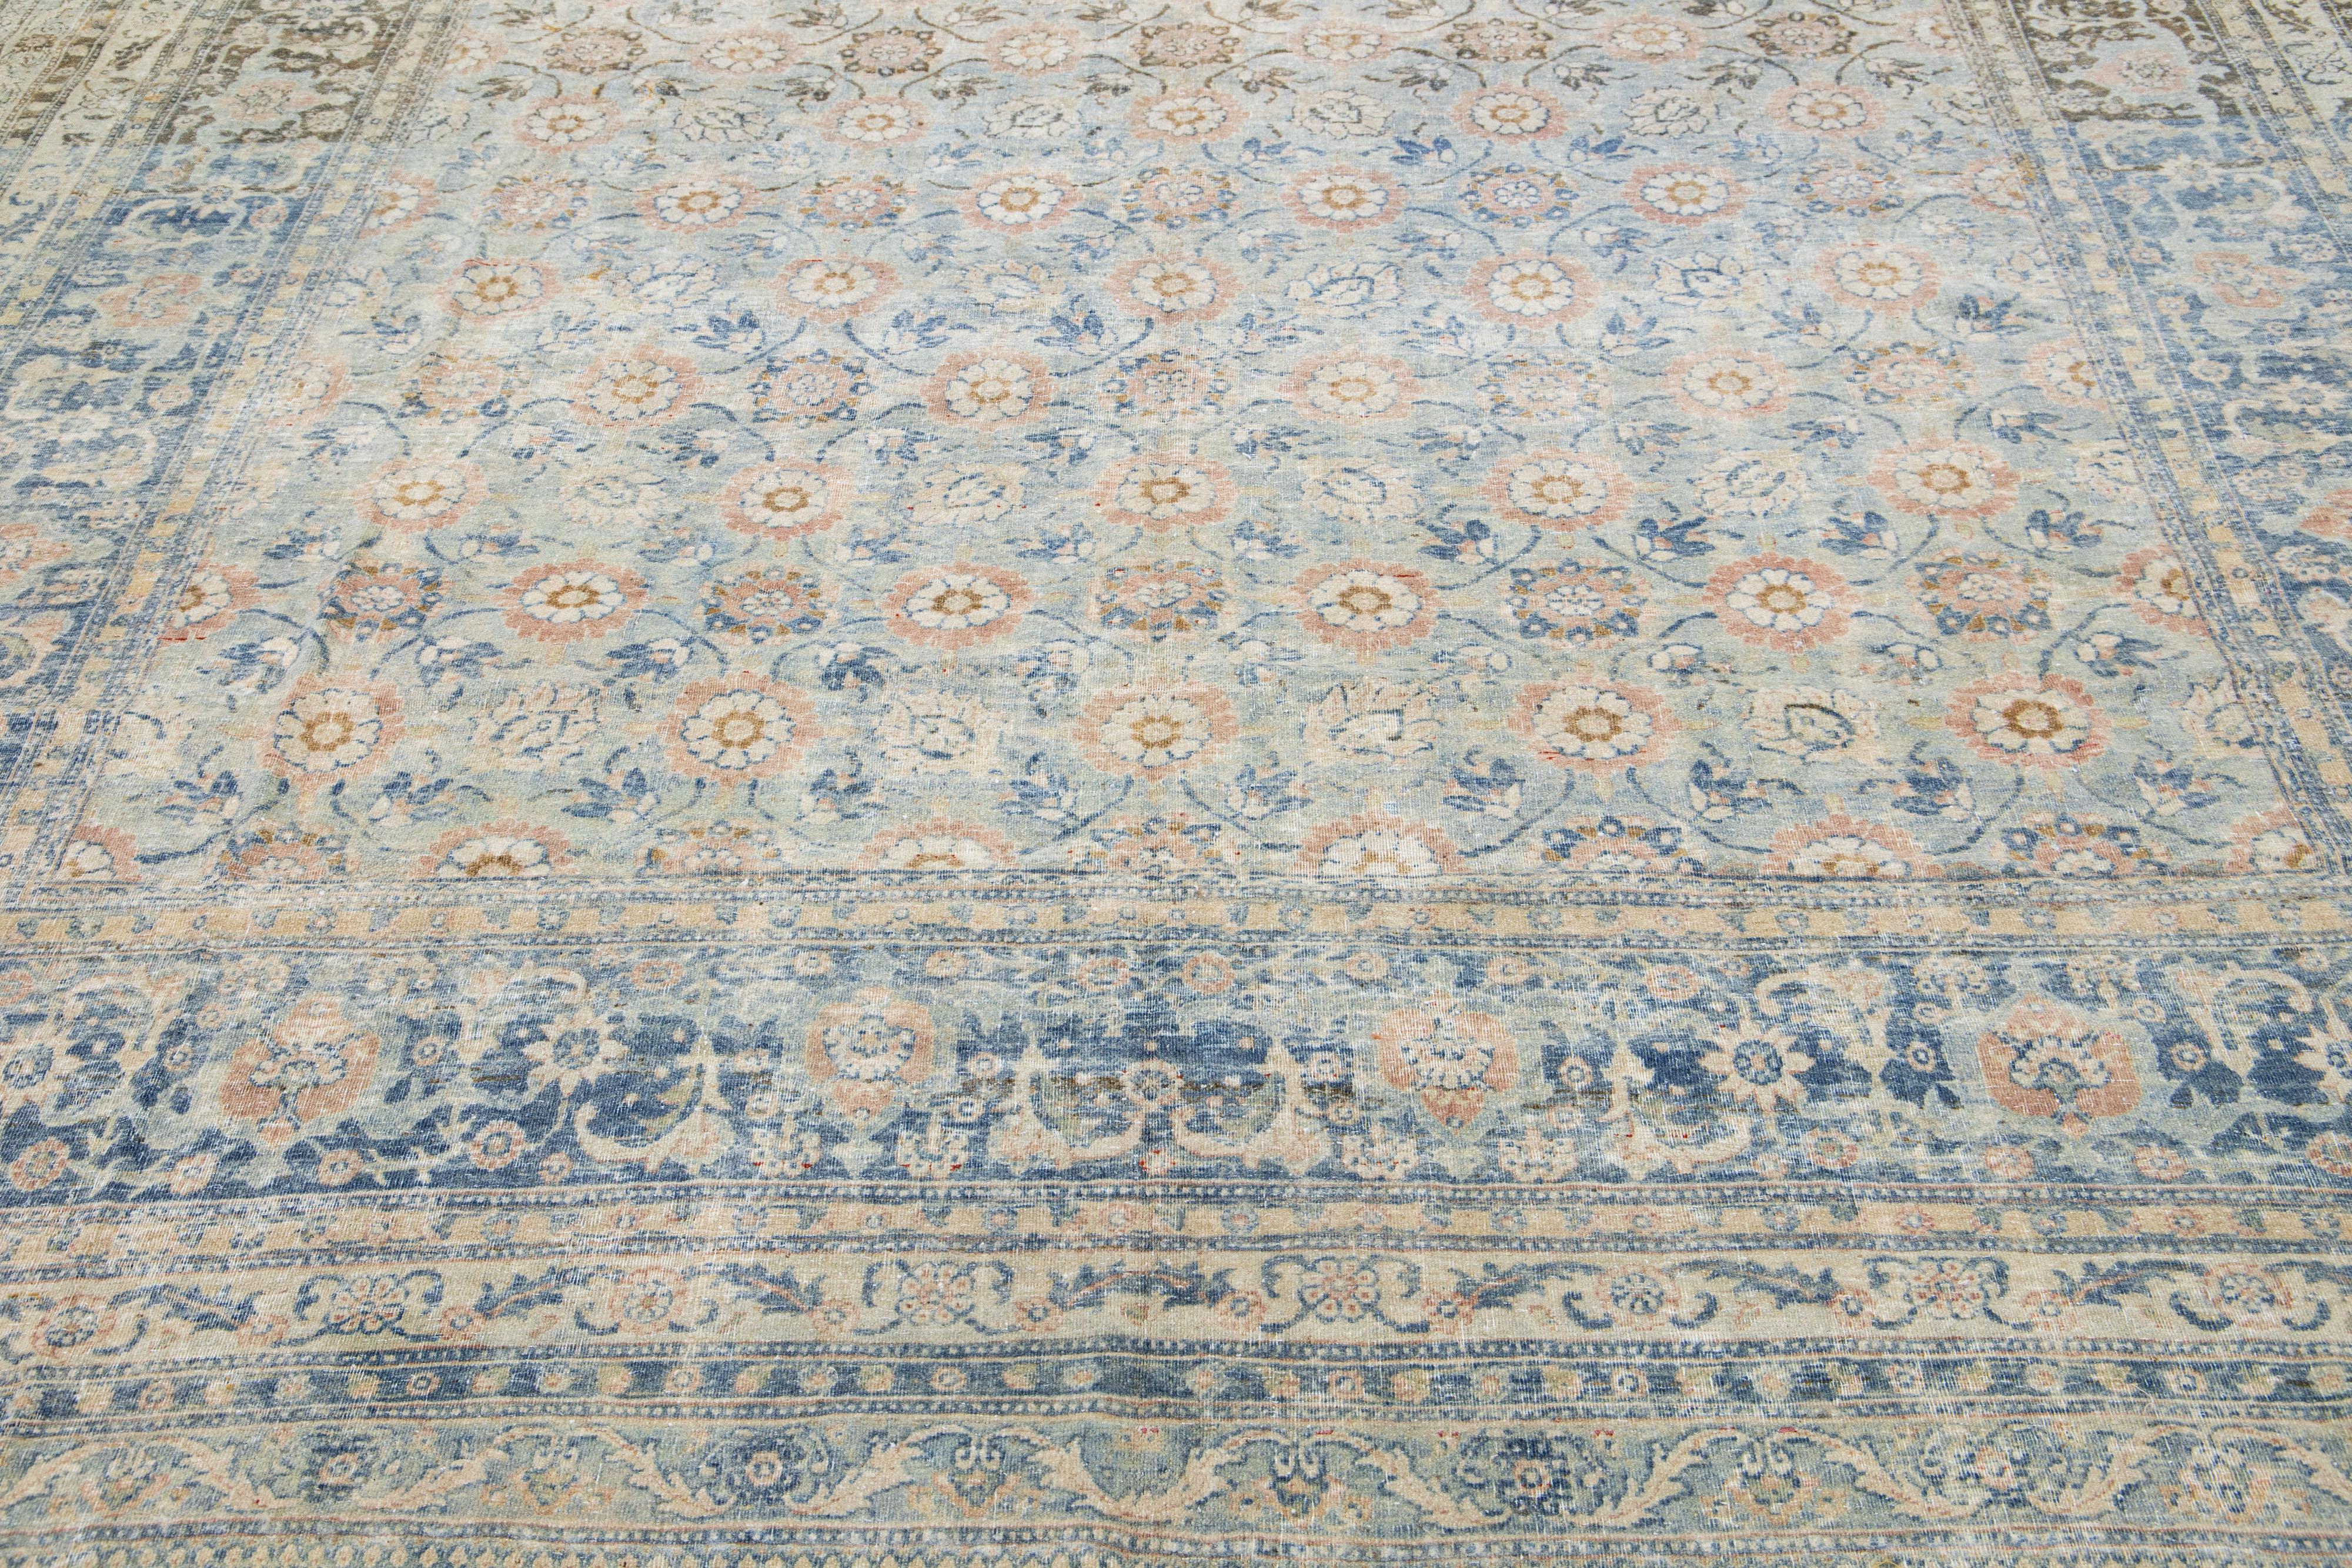 19th Century Antique Persian Tabriz Wool Rug Handmade Blue with Floral Motif For Sale 3